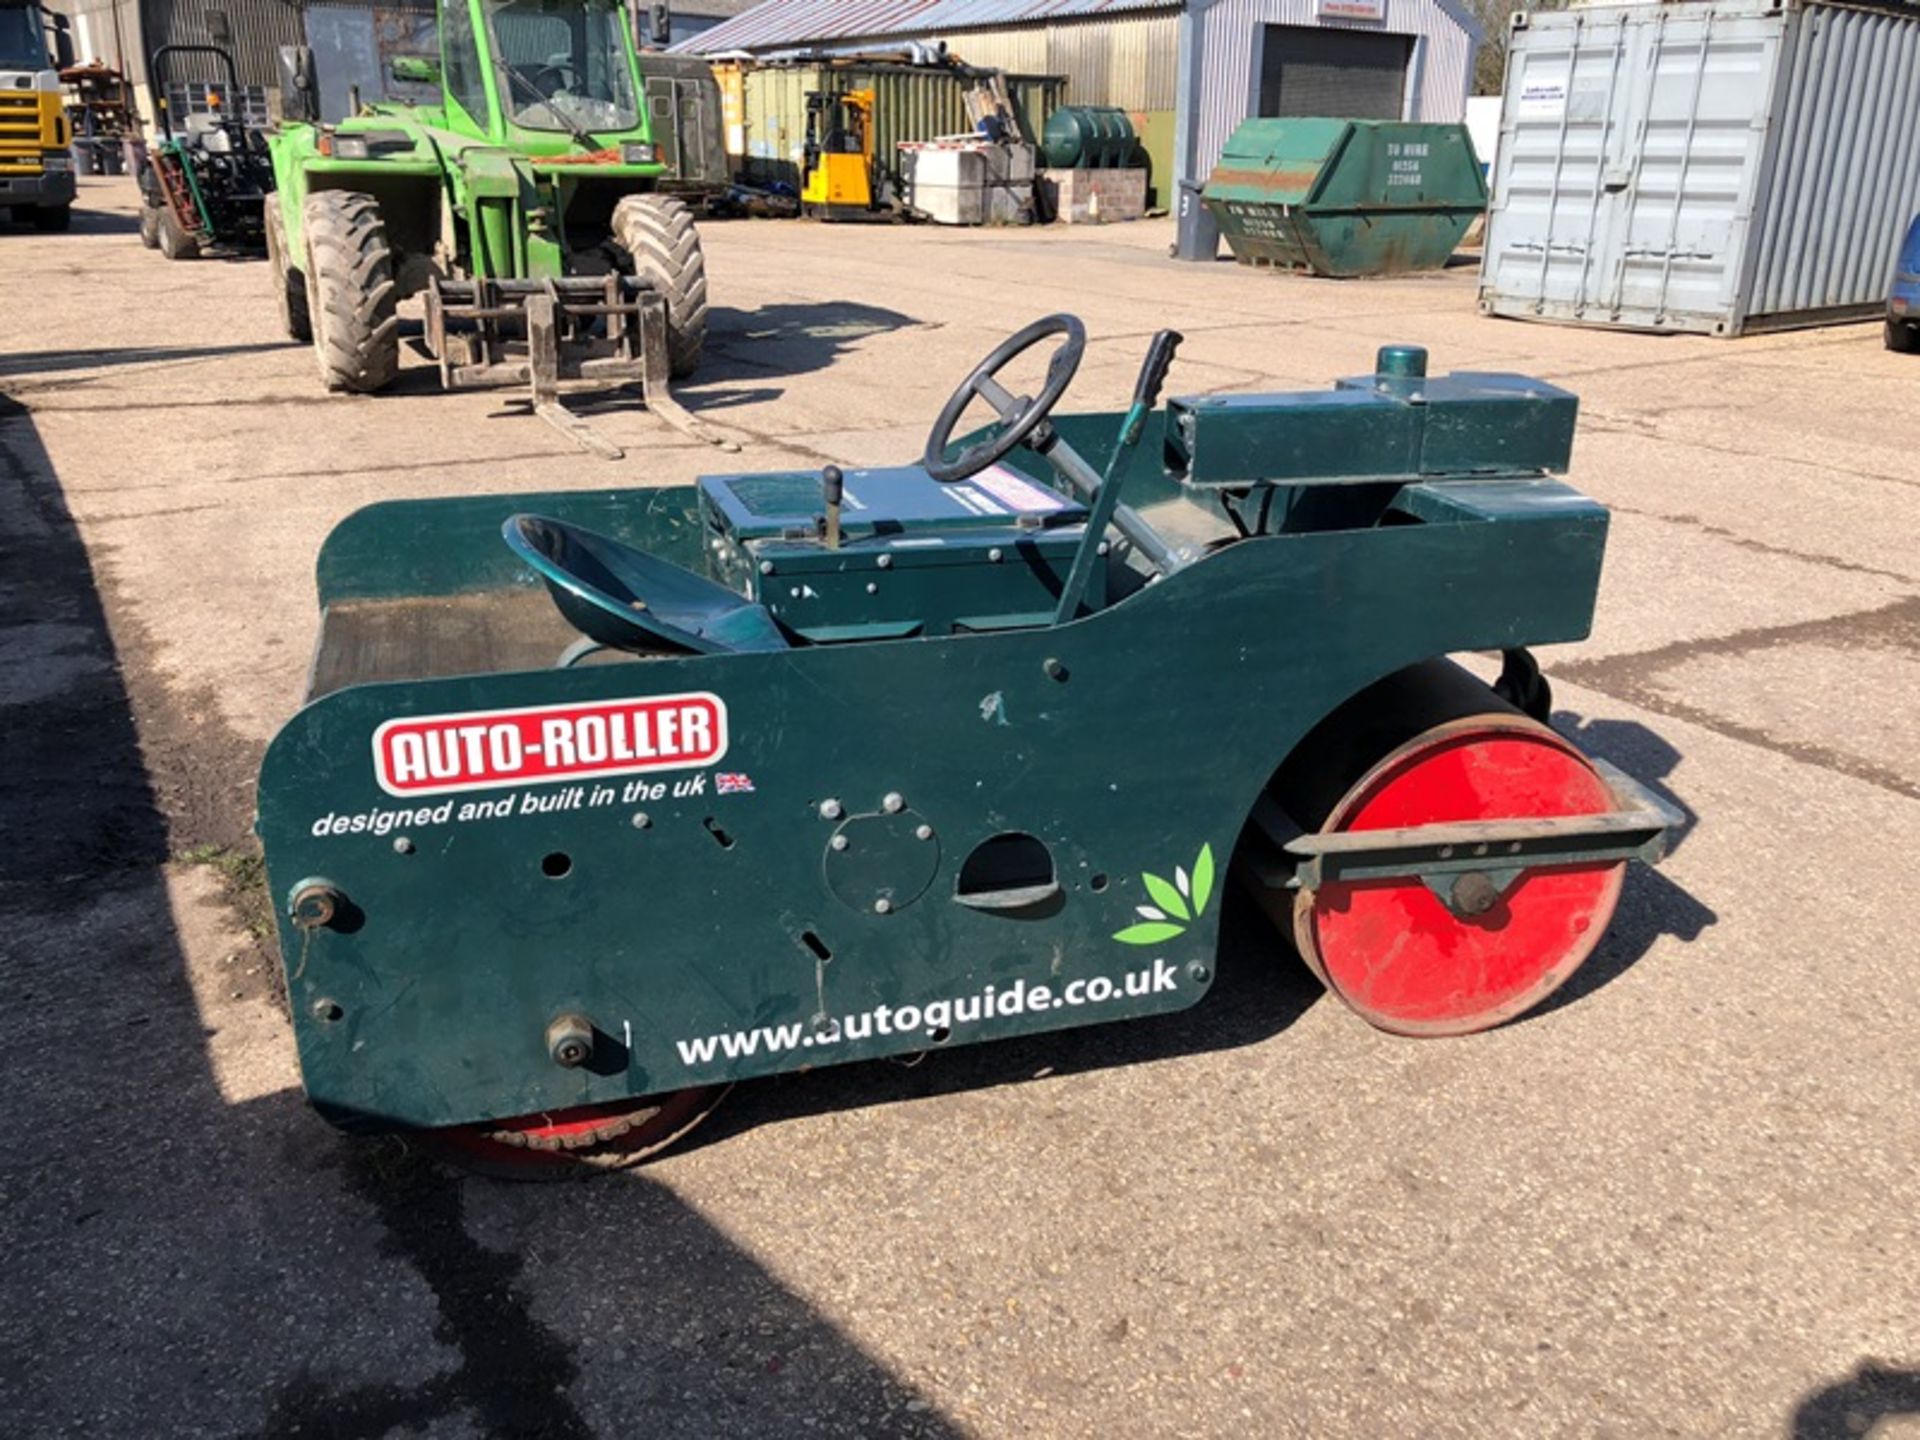 Auto Guide 3ft Auto Roller, model 30306 Serial No. 4218 Year: 2008 Hours: 2,978